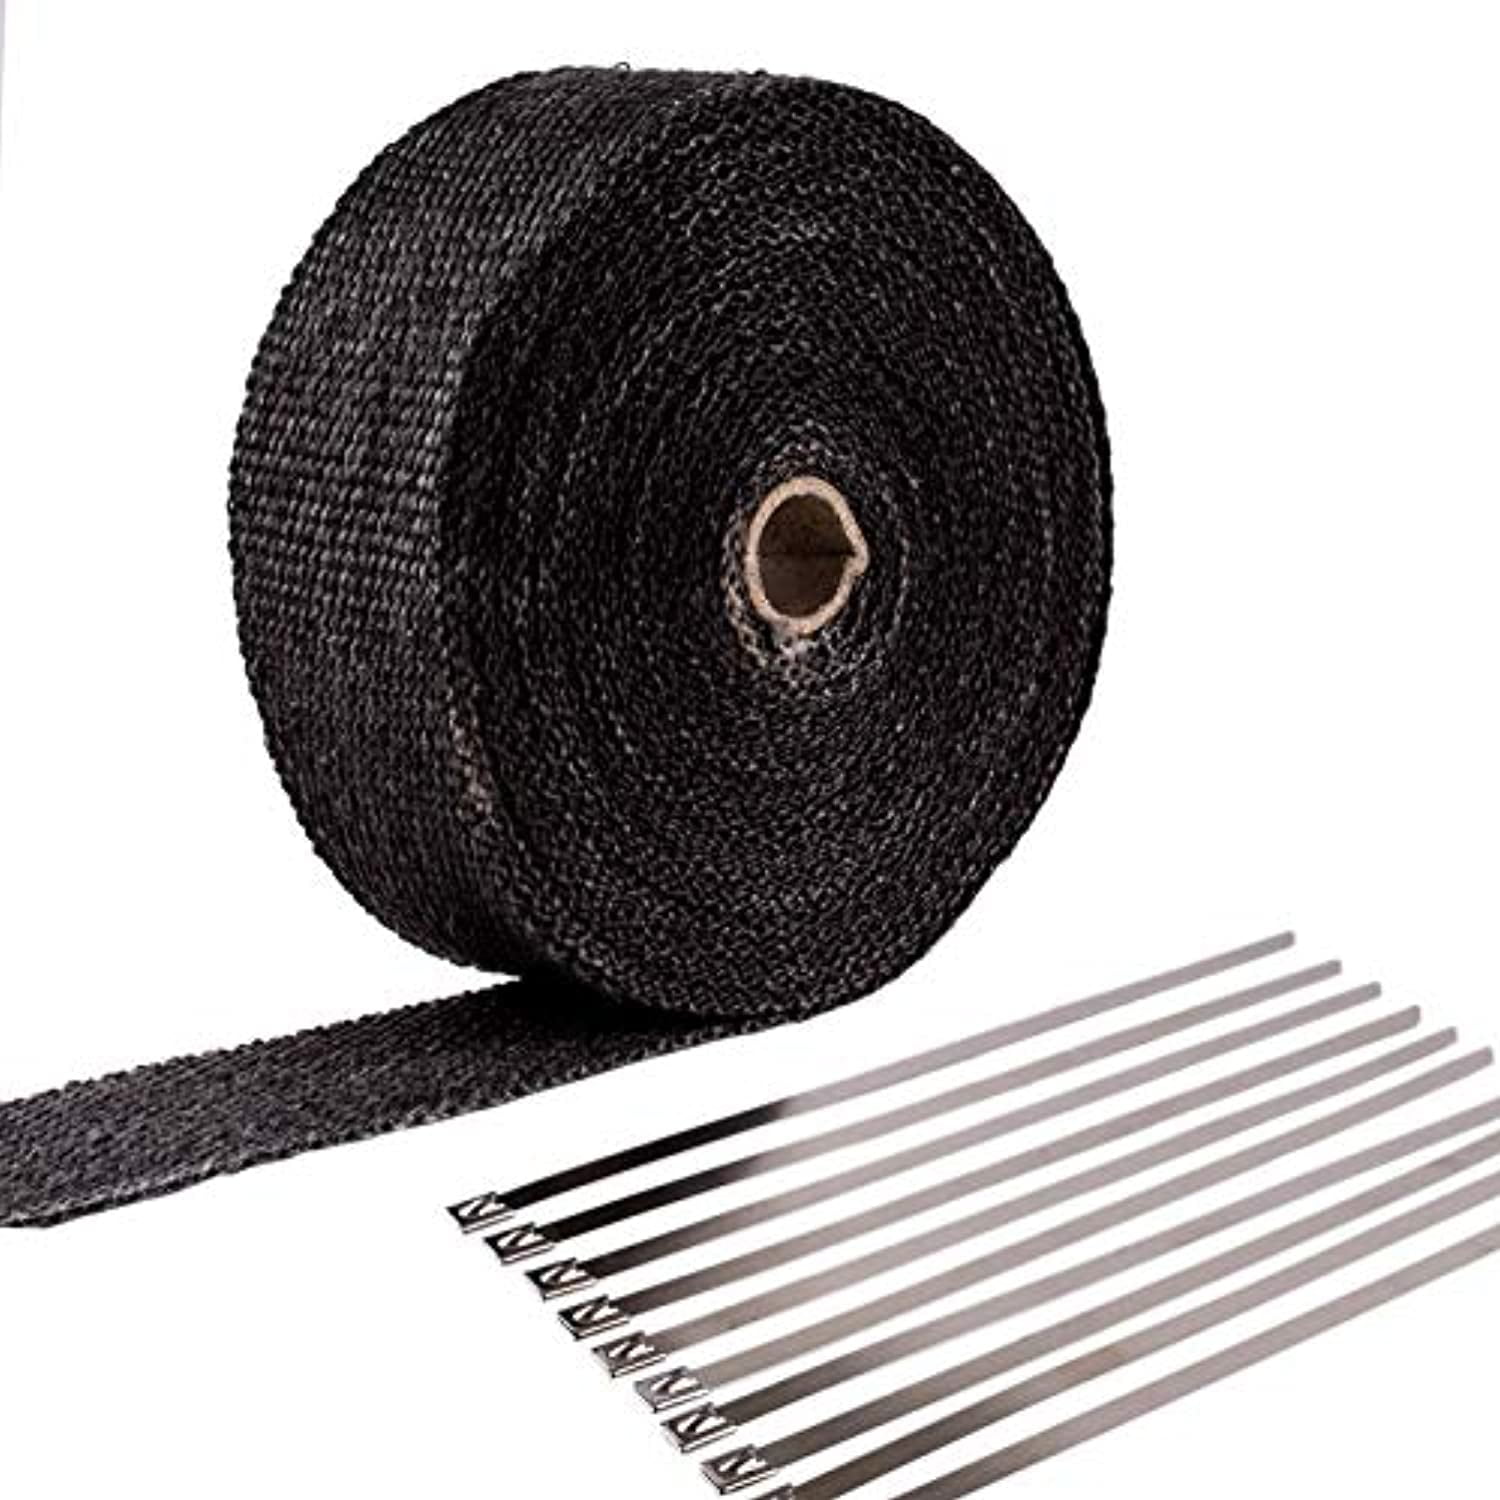 1 x 50 Black Exhaust Heat Wrap Roll for Motorcycle Fiberglass Heat Shield Tape with Stainless Ties 